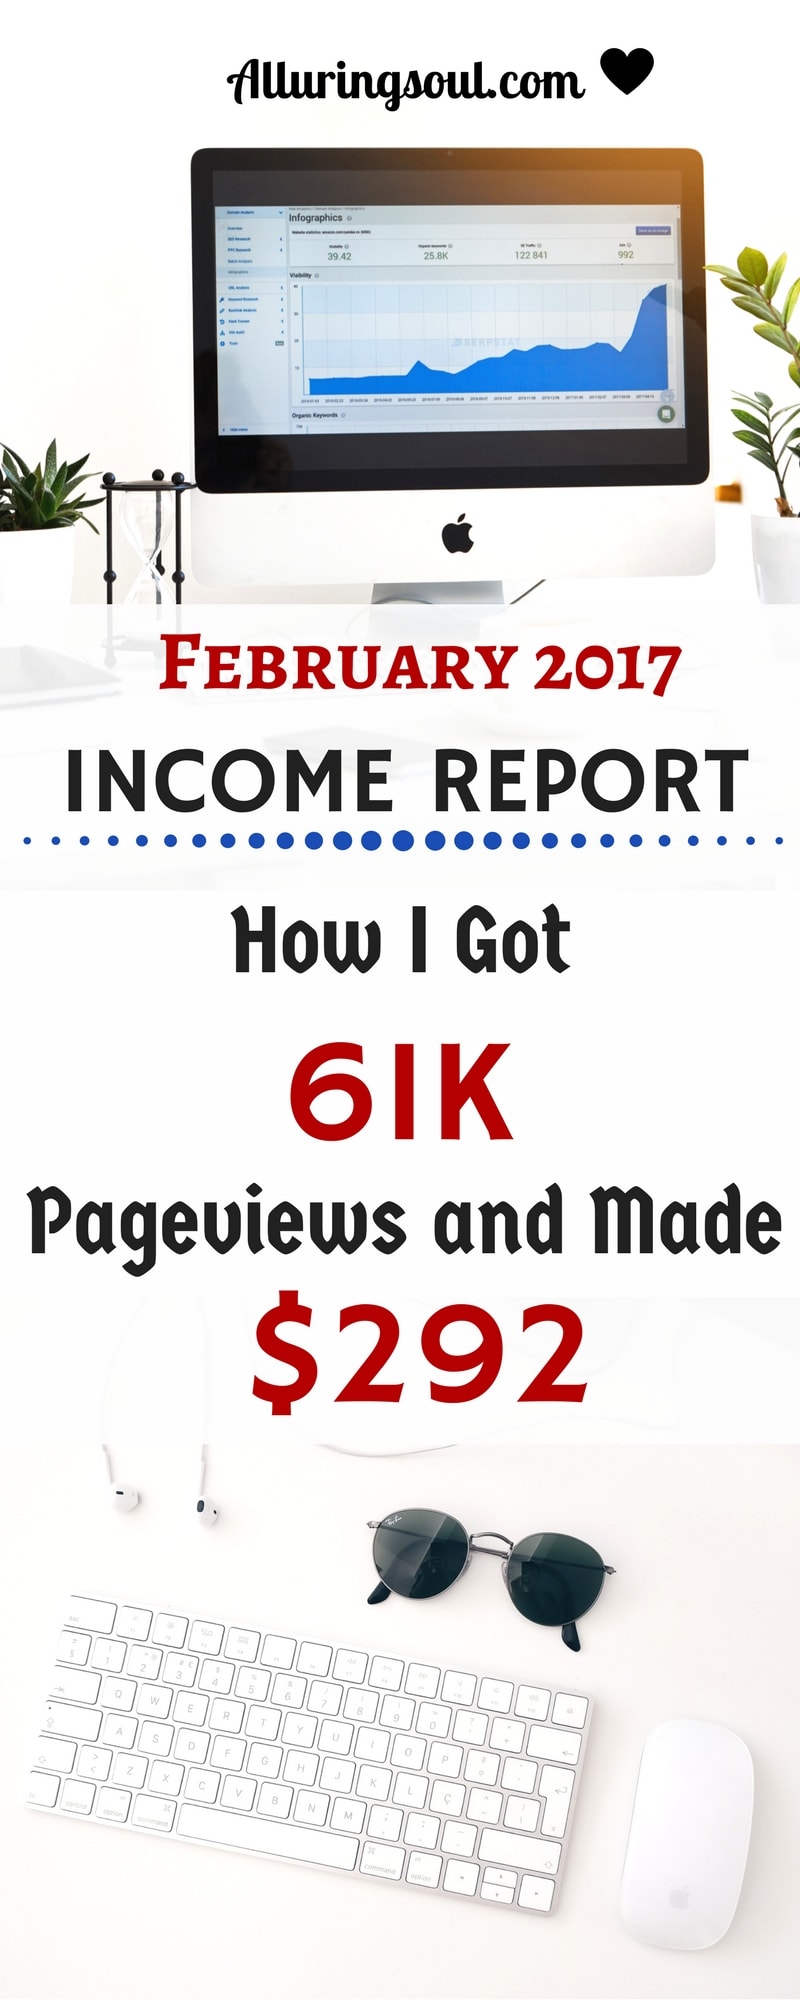 income-report-february-2017-infographic